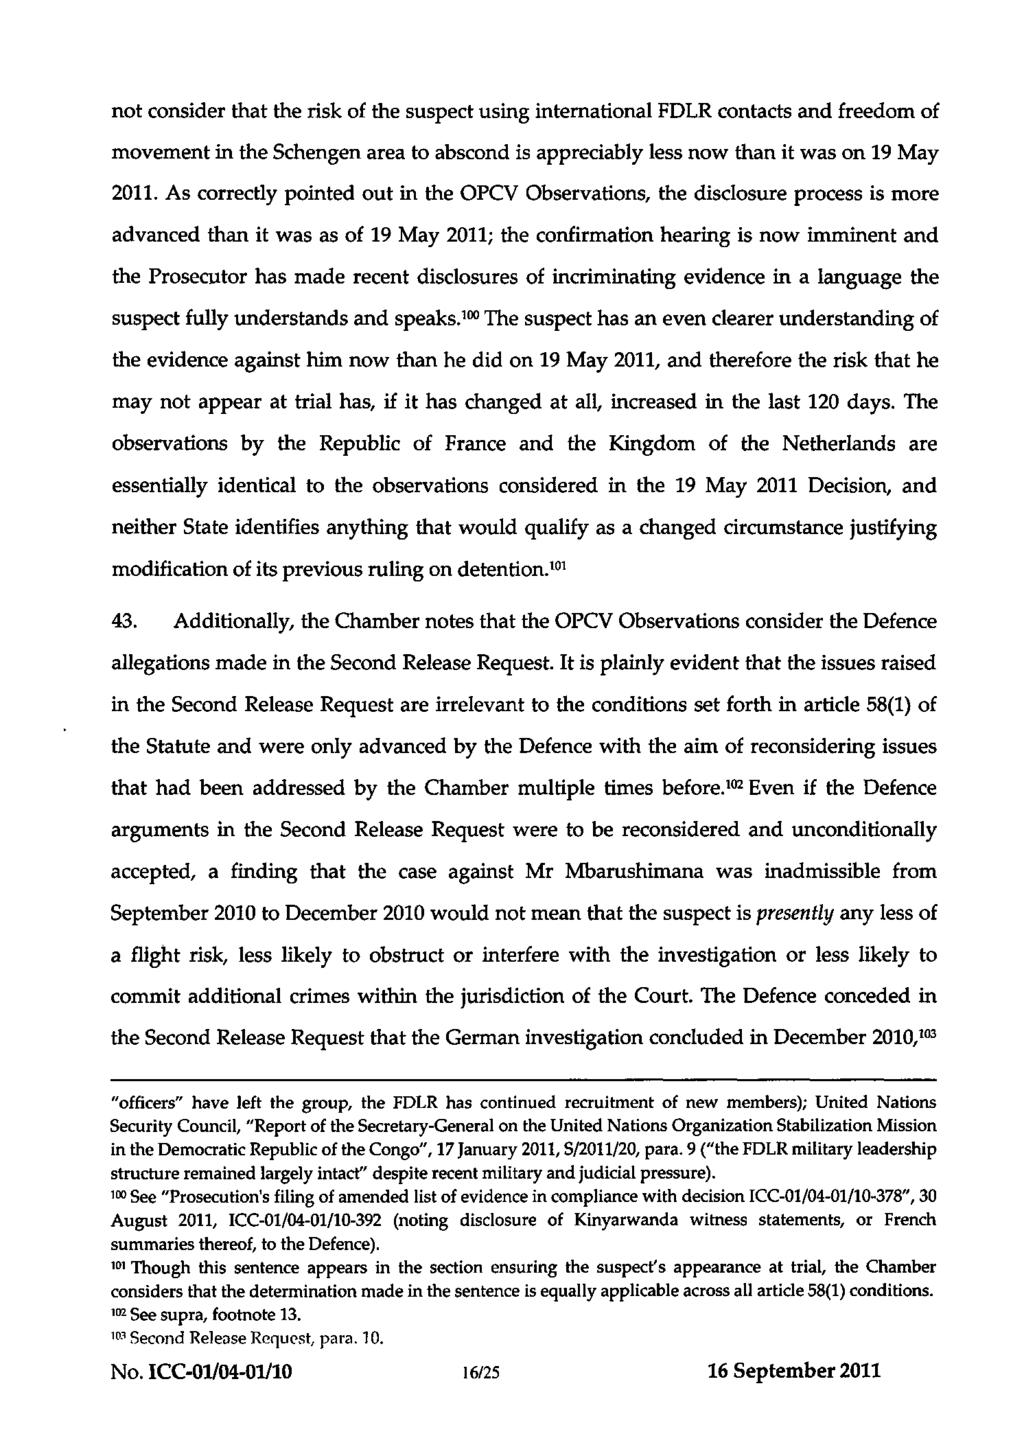 ICC-01/04-01/10-428 16-09-2011 16/25 EO PT not consider that the risk of the suspect using international FDLR contacts and freedom of movement in the Schengen area to abscond is appreciably less now